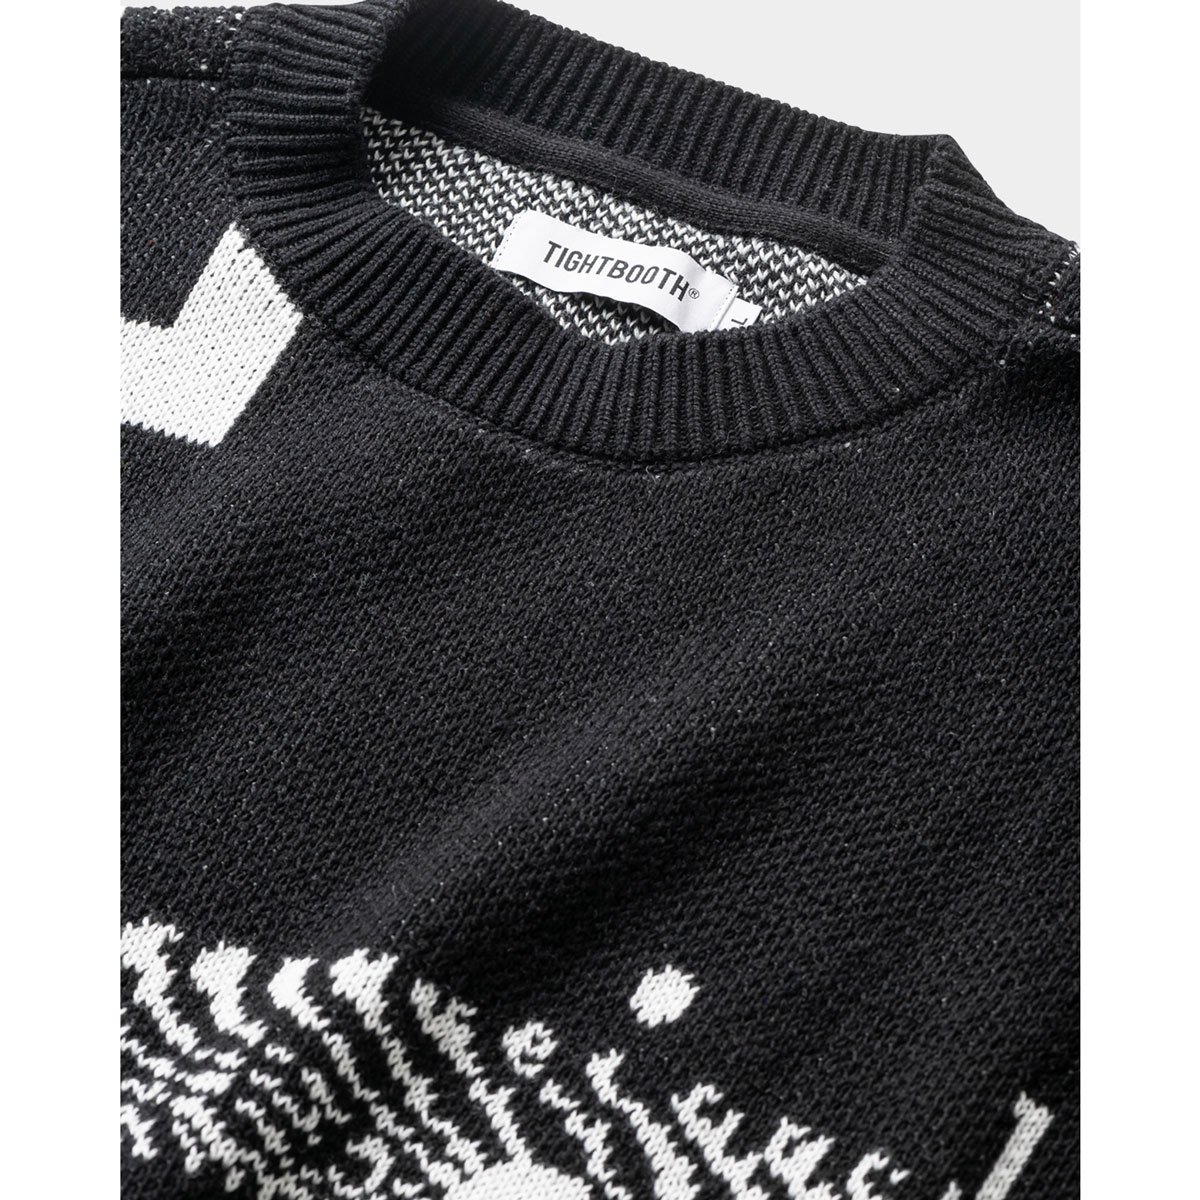 TIGHTBOOTH - COVID-19 KNIT SWEATER - SHRED